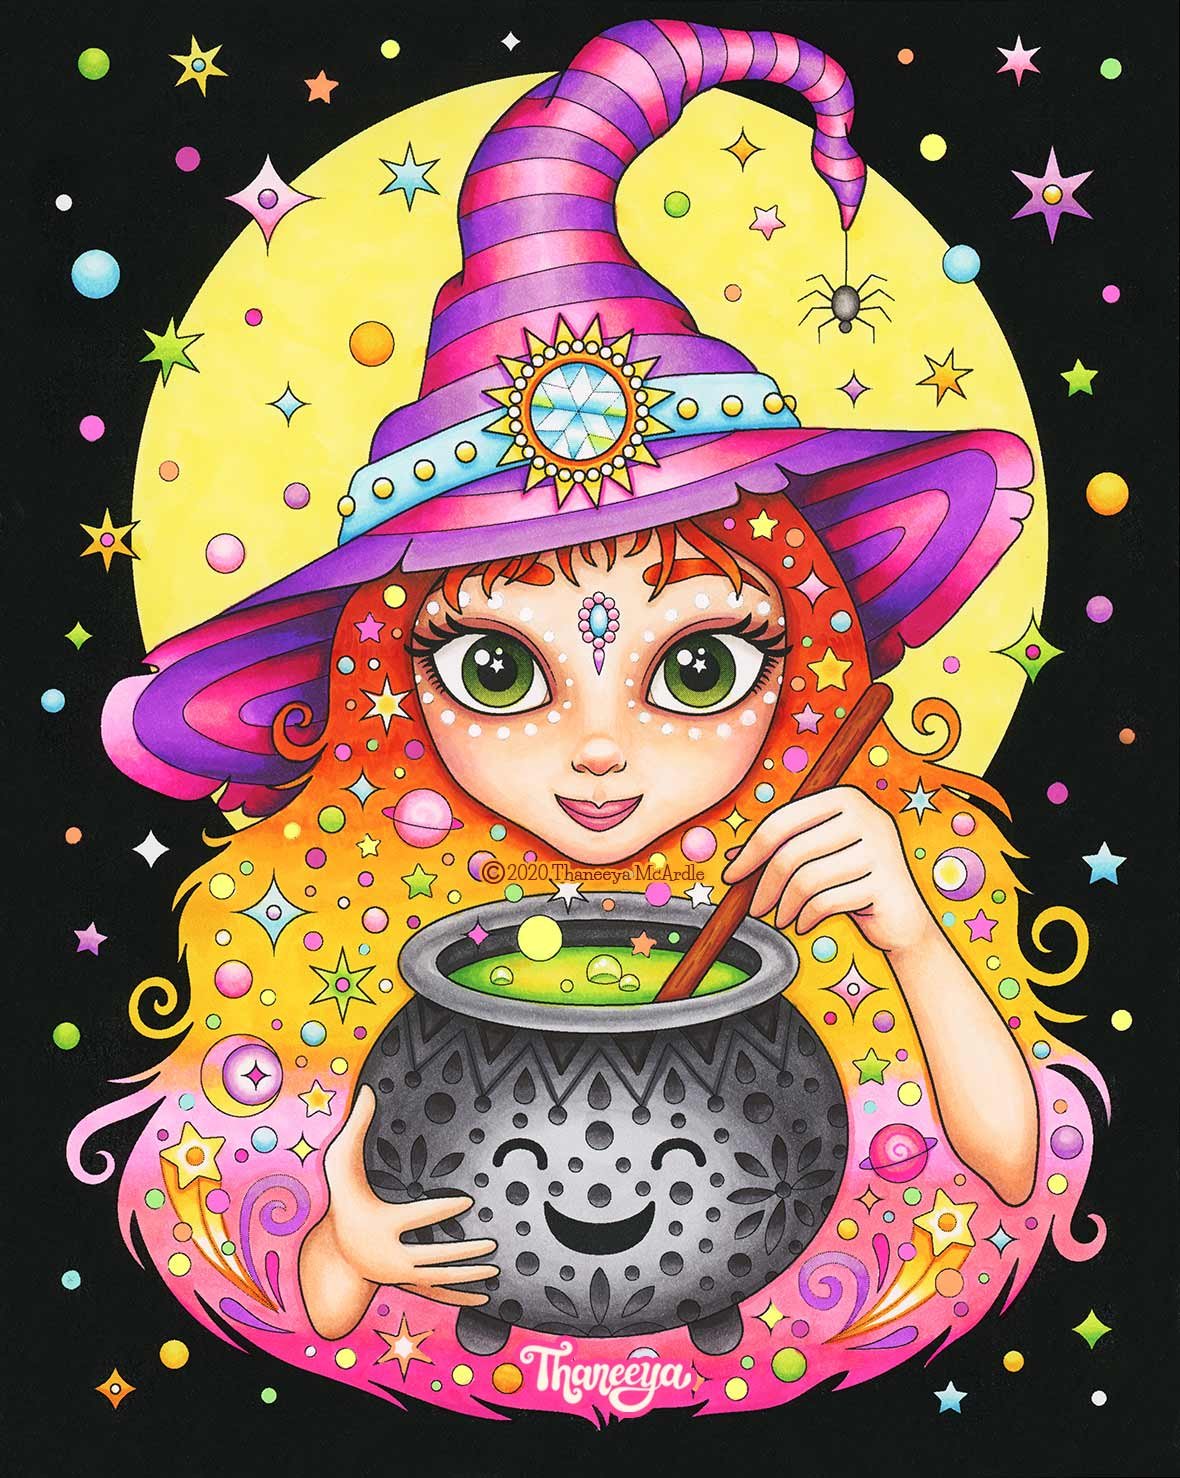 https://images.squarespace-cdn.com/content/v1/5511fc7ce4b0a3782aa9418b/1673564587313-ZHYHR0Z2WPWYZVHUI4IW/Cute-Halloween-Rainbow-Witch-with-Cauldron-Coloring-Page-by-Thaneeya-McArdle-2.jpg